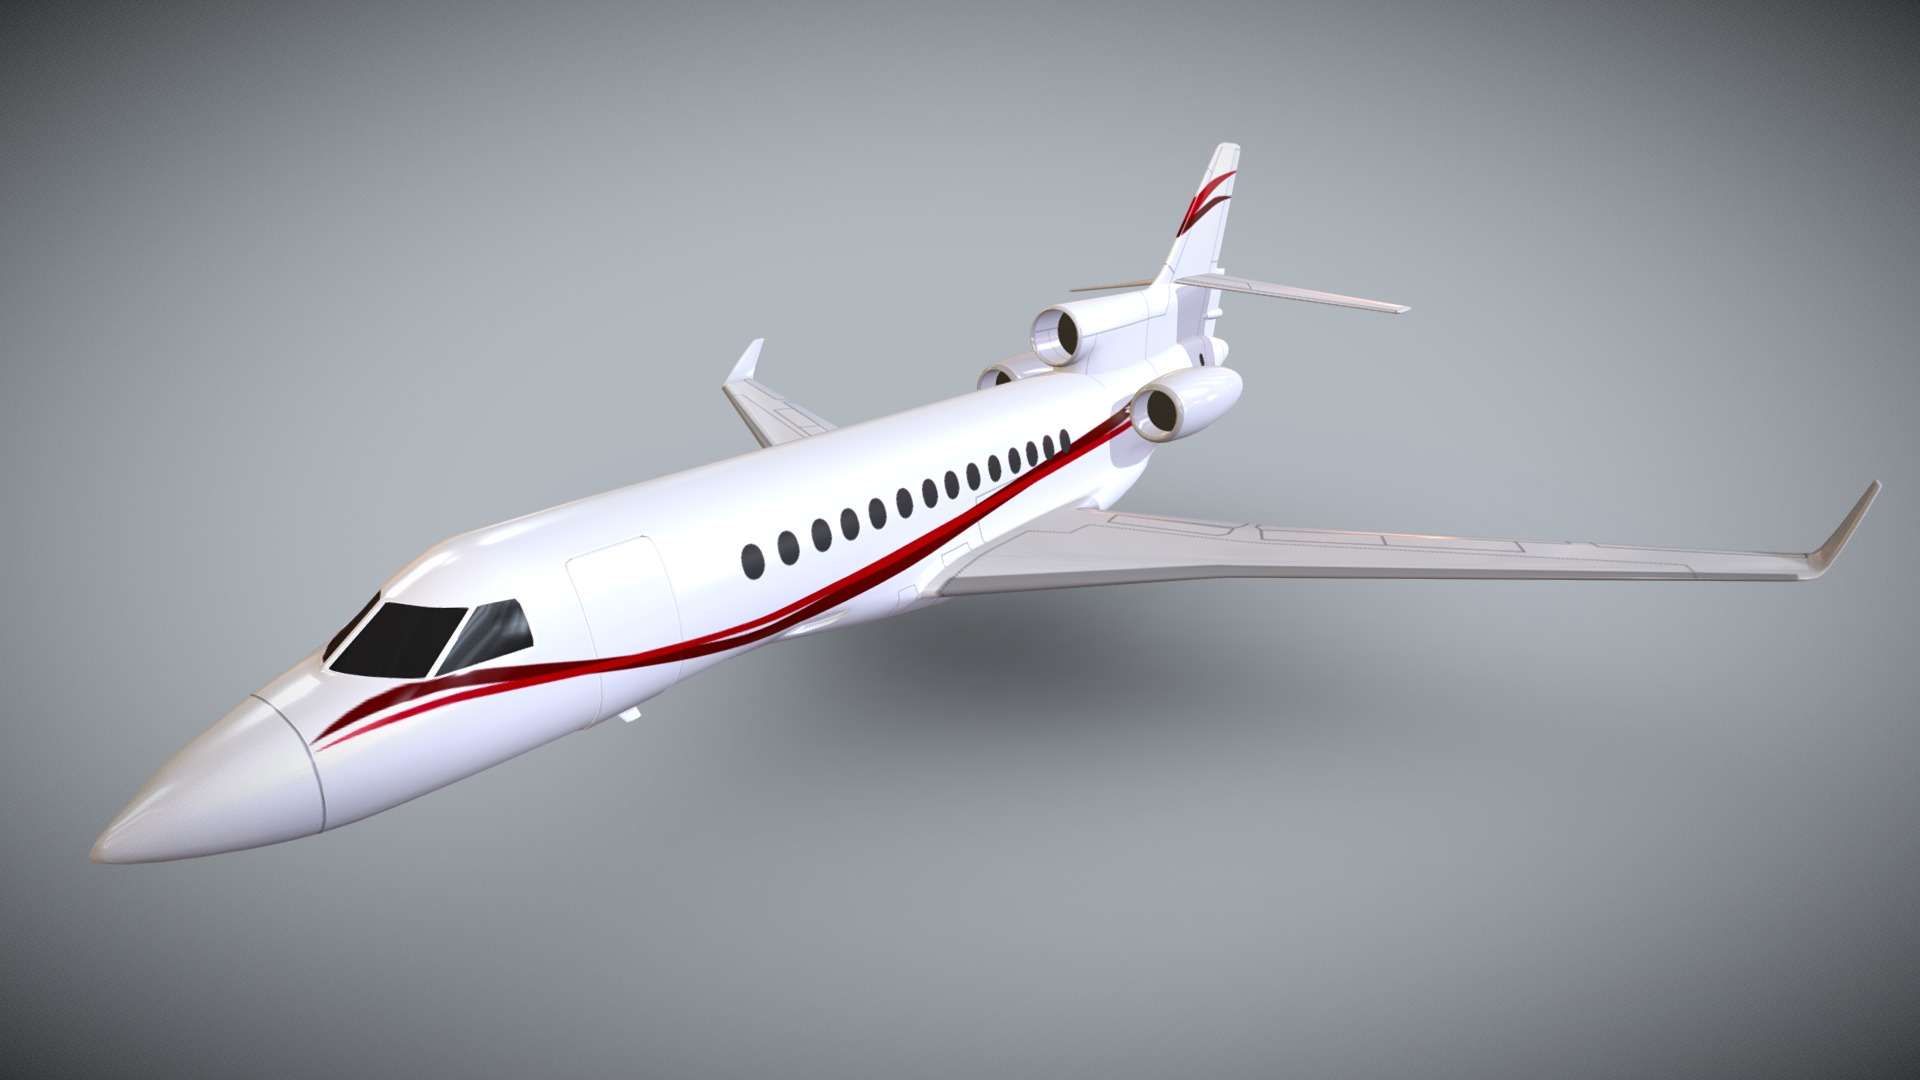 3D model Dassault Falcon 7x business jet - This is a 3D model of the Dassault Falcon 7x business jet. The 3D model is about a white and red airplane.